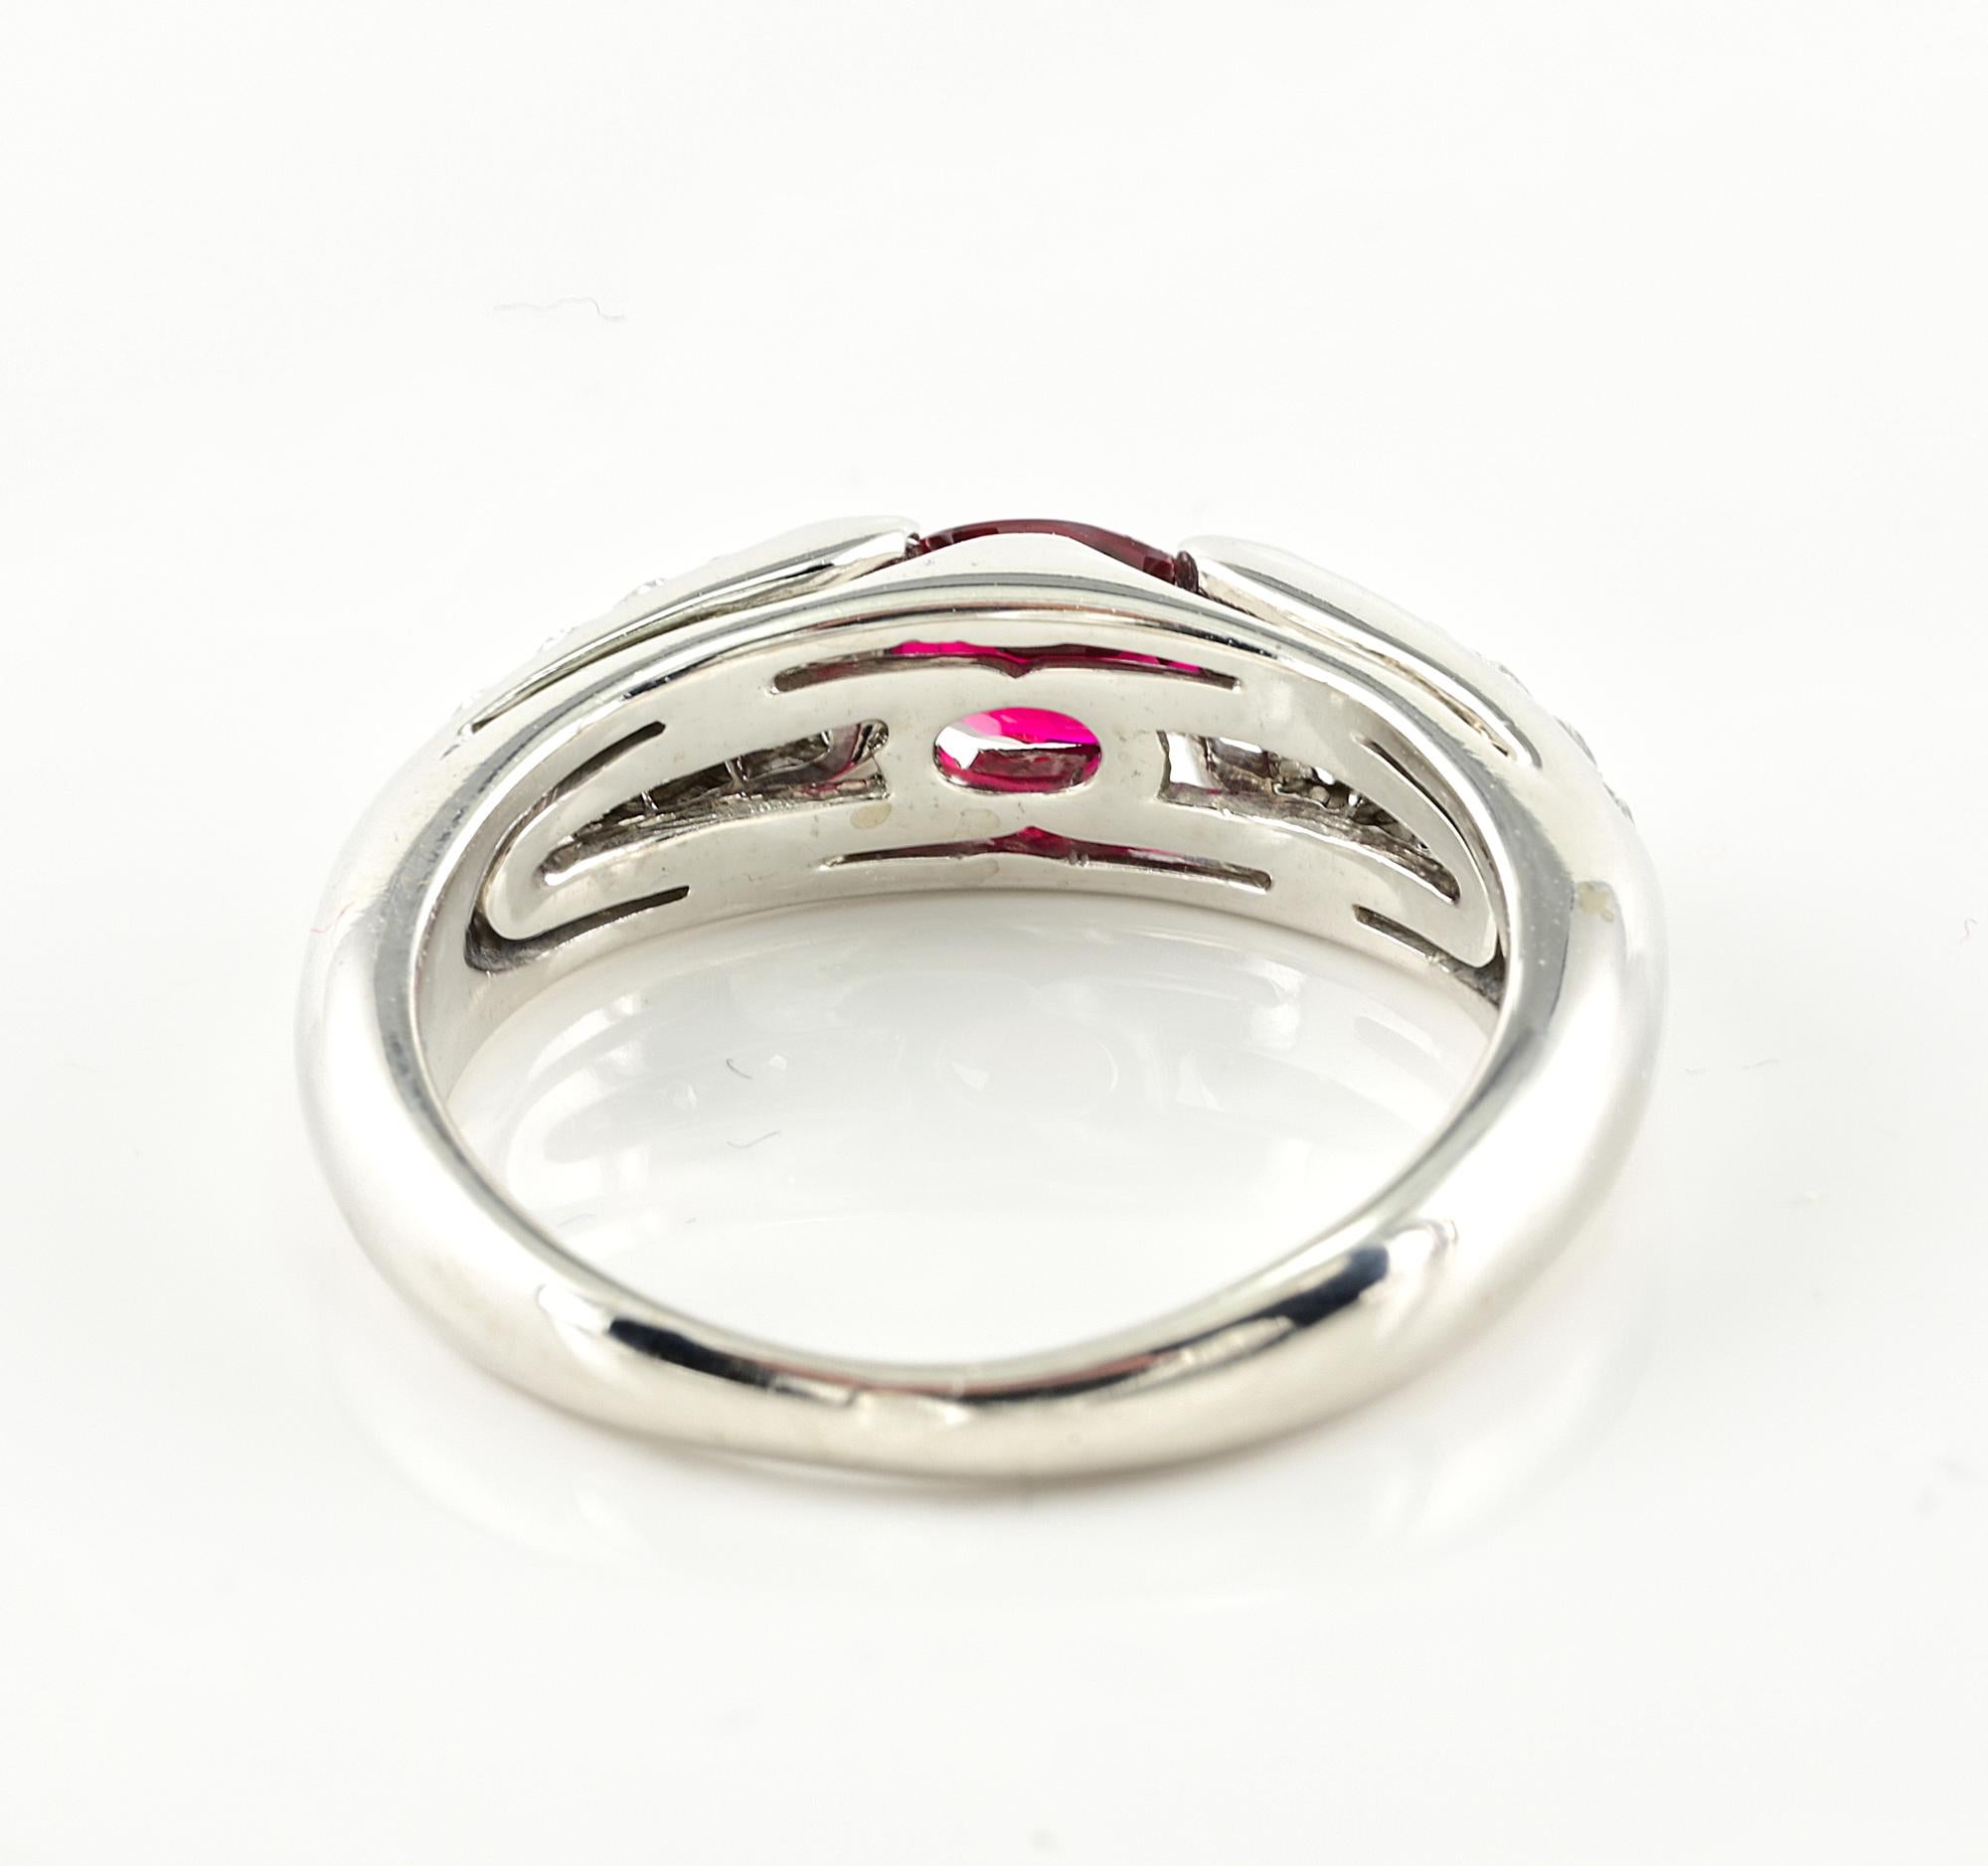 Iconic Bvlgari Ruby Diamond 18KT Ring 1980 For Sale 2